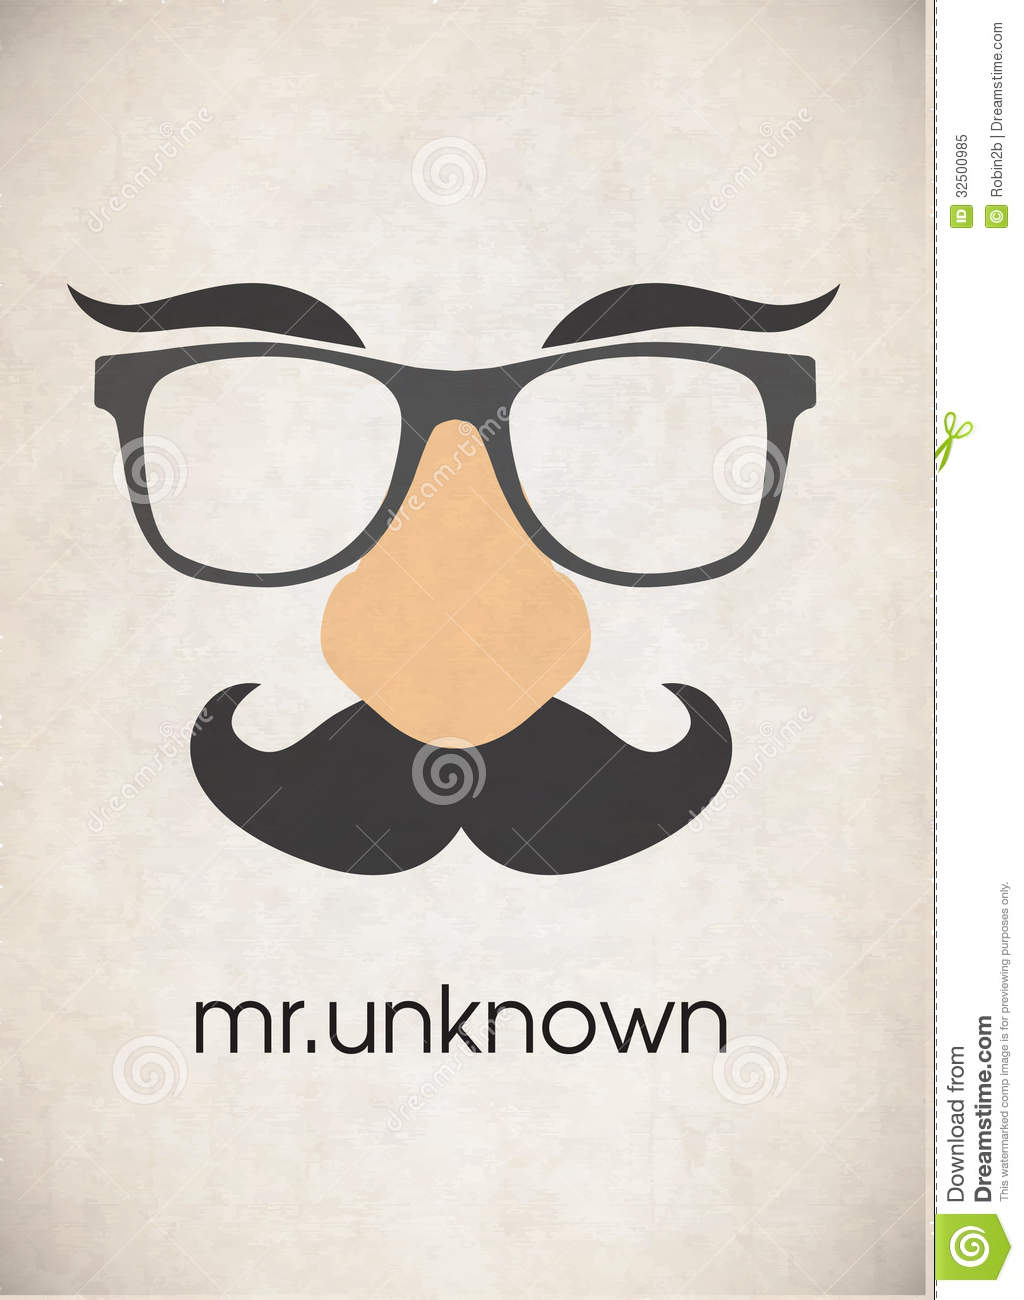 Disguise Mask Royalty Free Stock Photo   Image  32500985